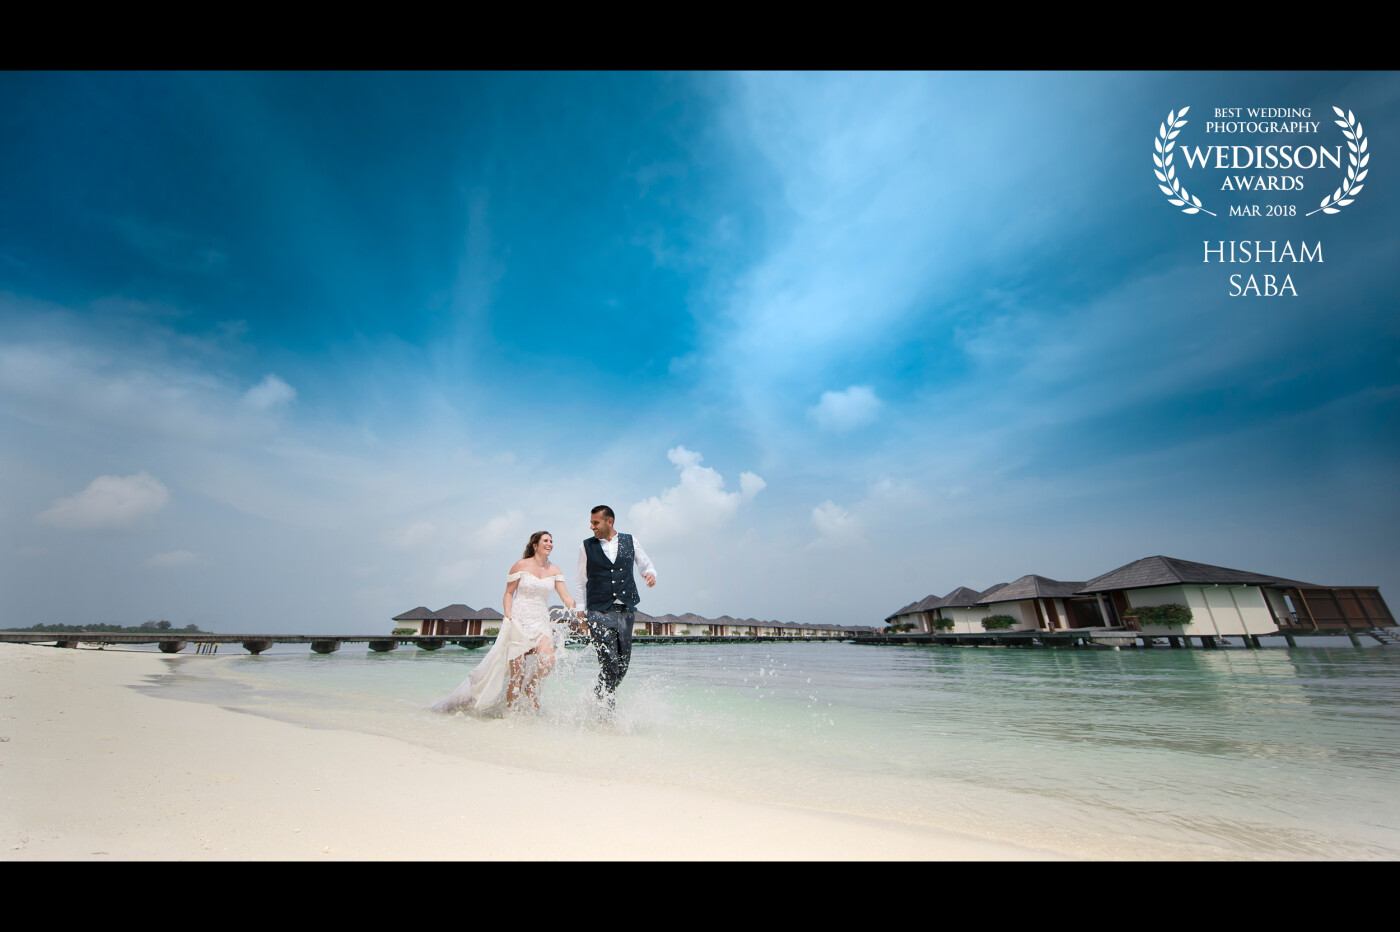 Divers, passionate about the sea, ocean lovers from birth, our Bride&Groom chose the charming Maldives with its crystal clear water to tie the knot.<br />
This spontaneous shot reflects the Love and happiness that was felt on that amazing day